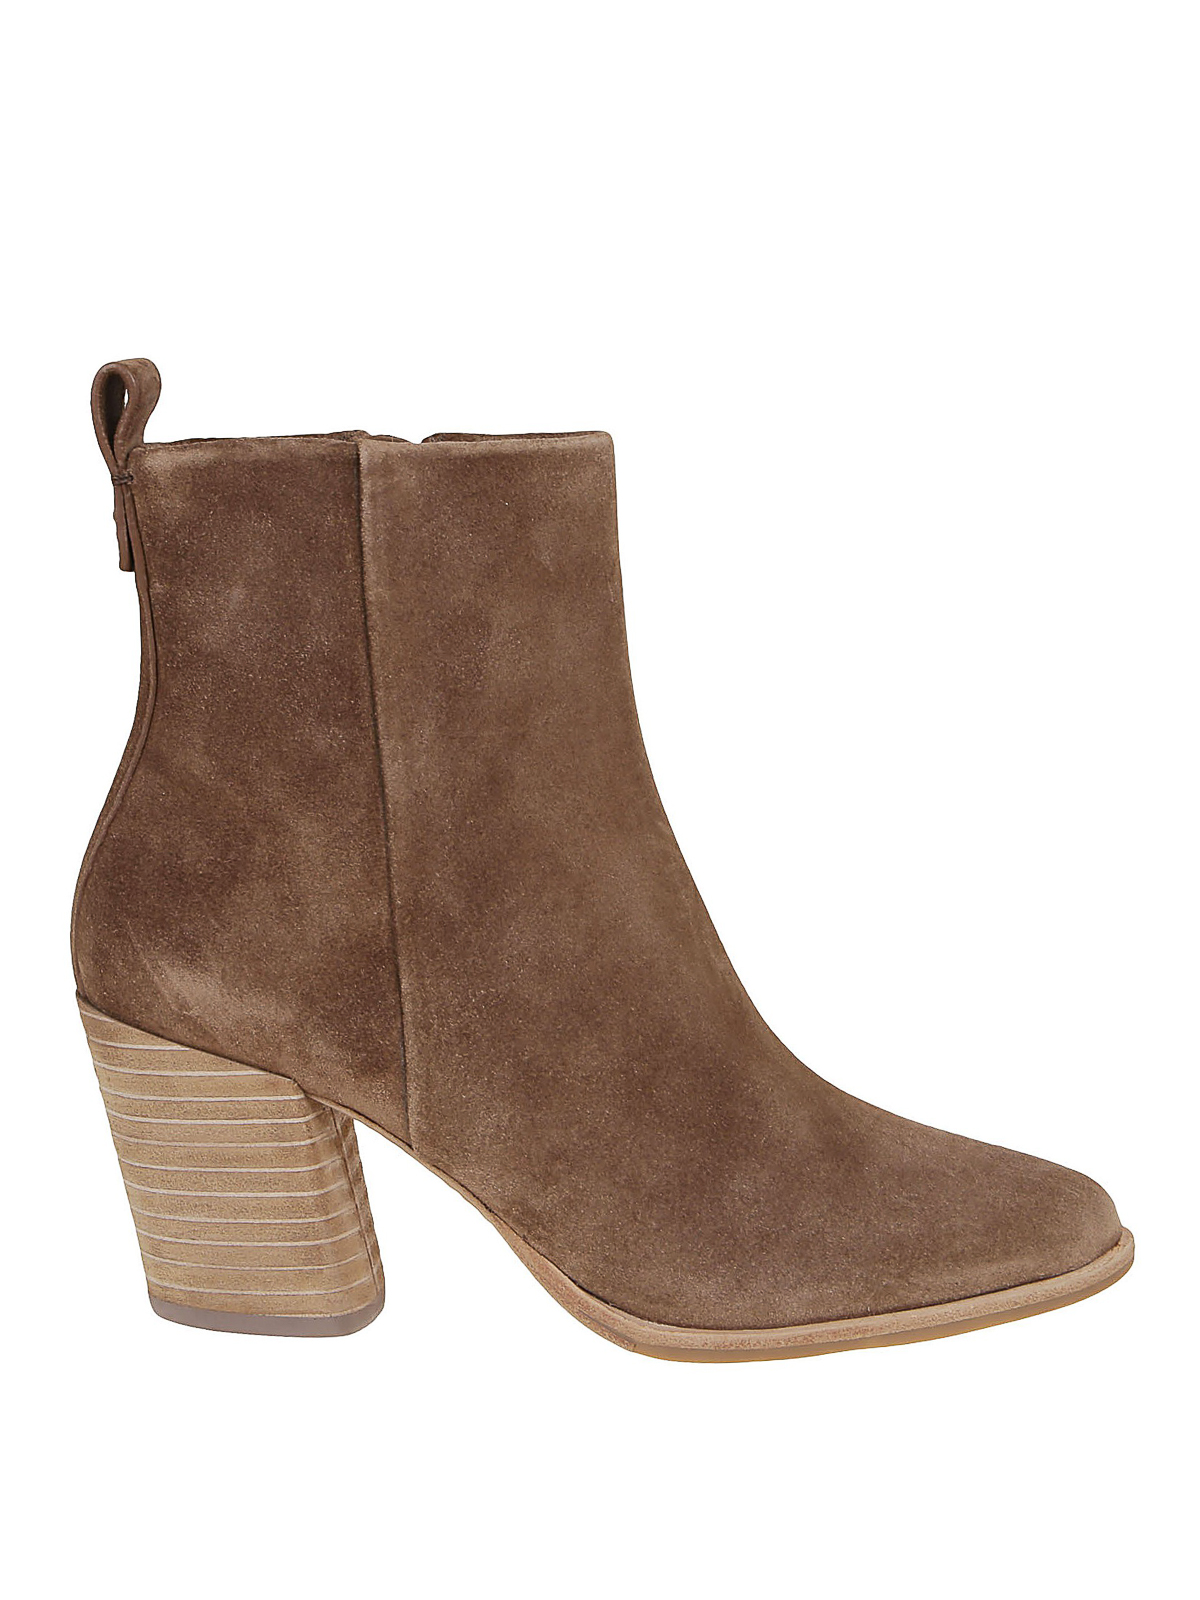 Ankle boots Tory Burch - Suede booties - 75478037 | Shop online at iKRIX